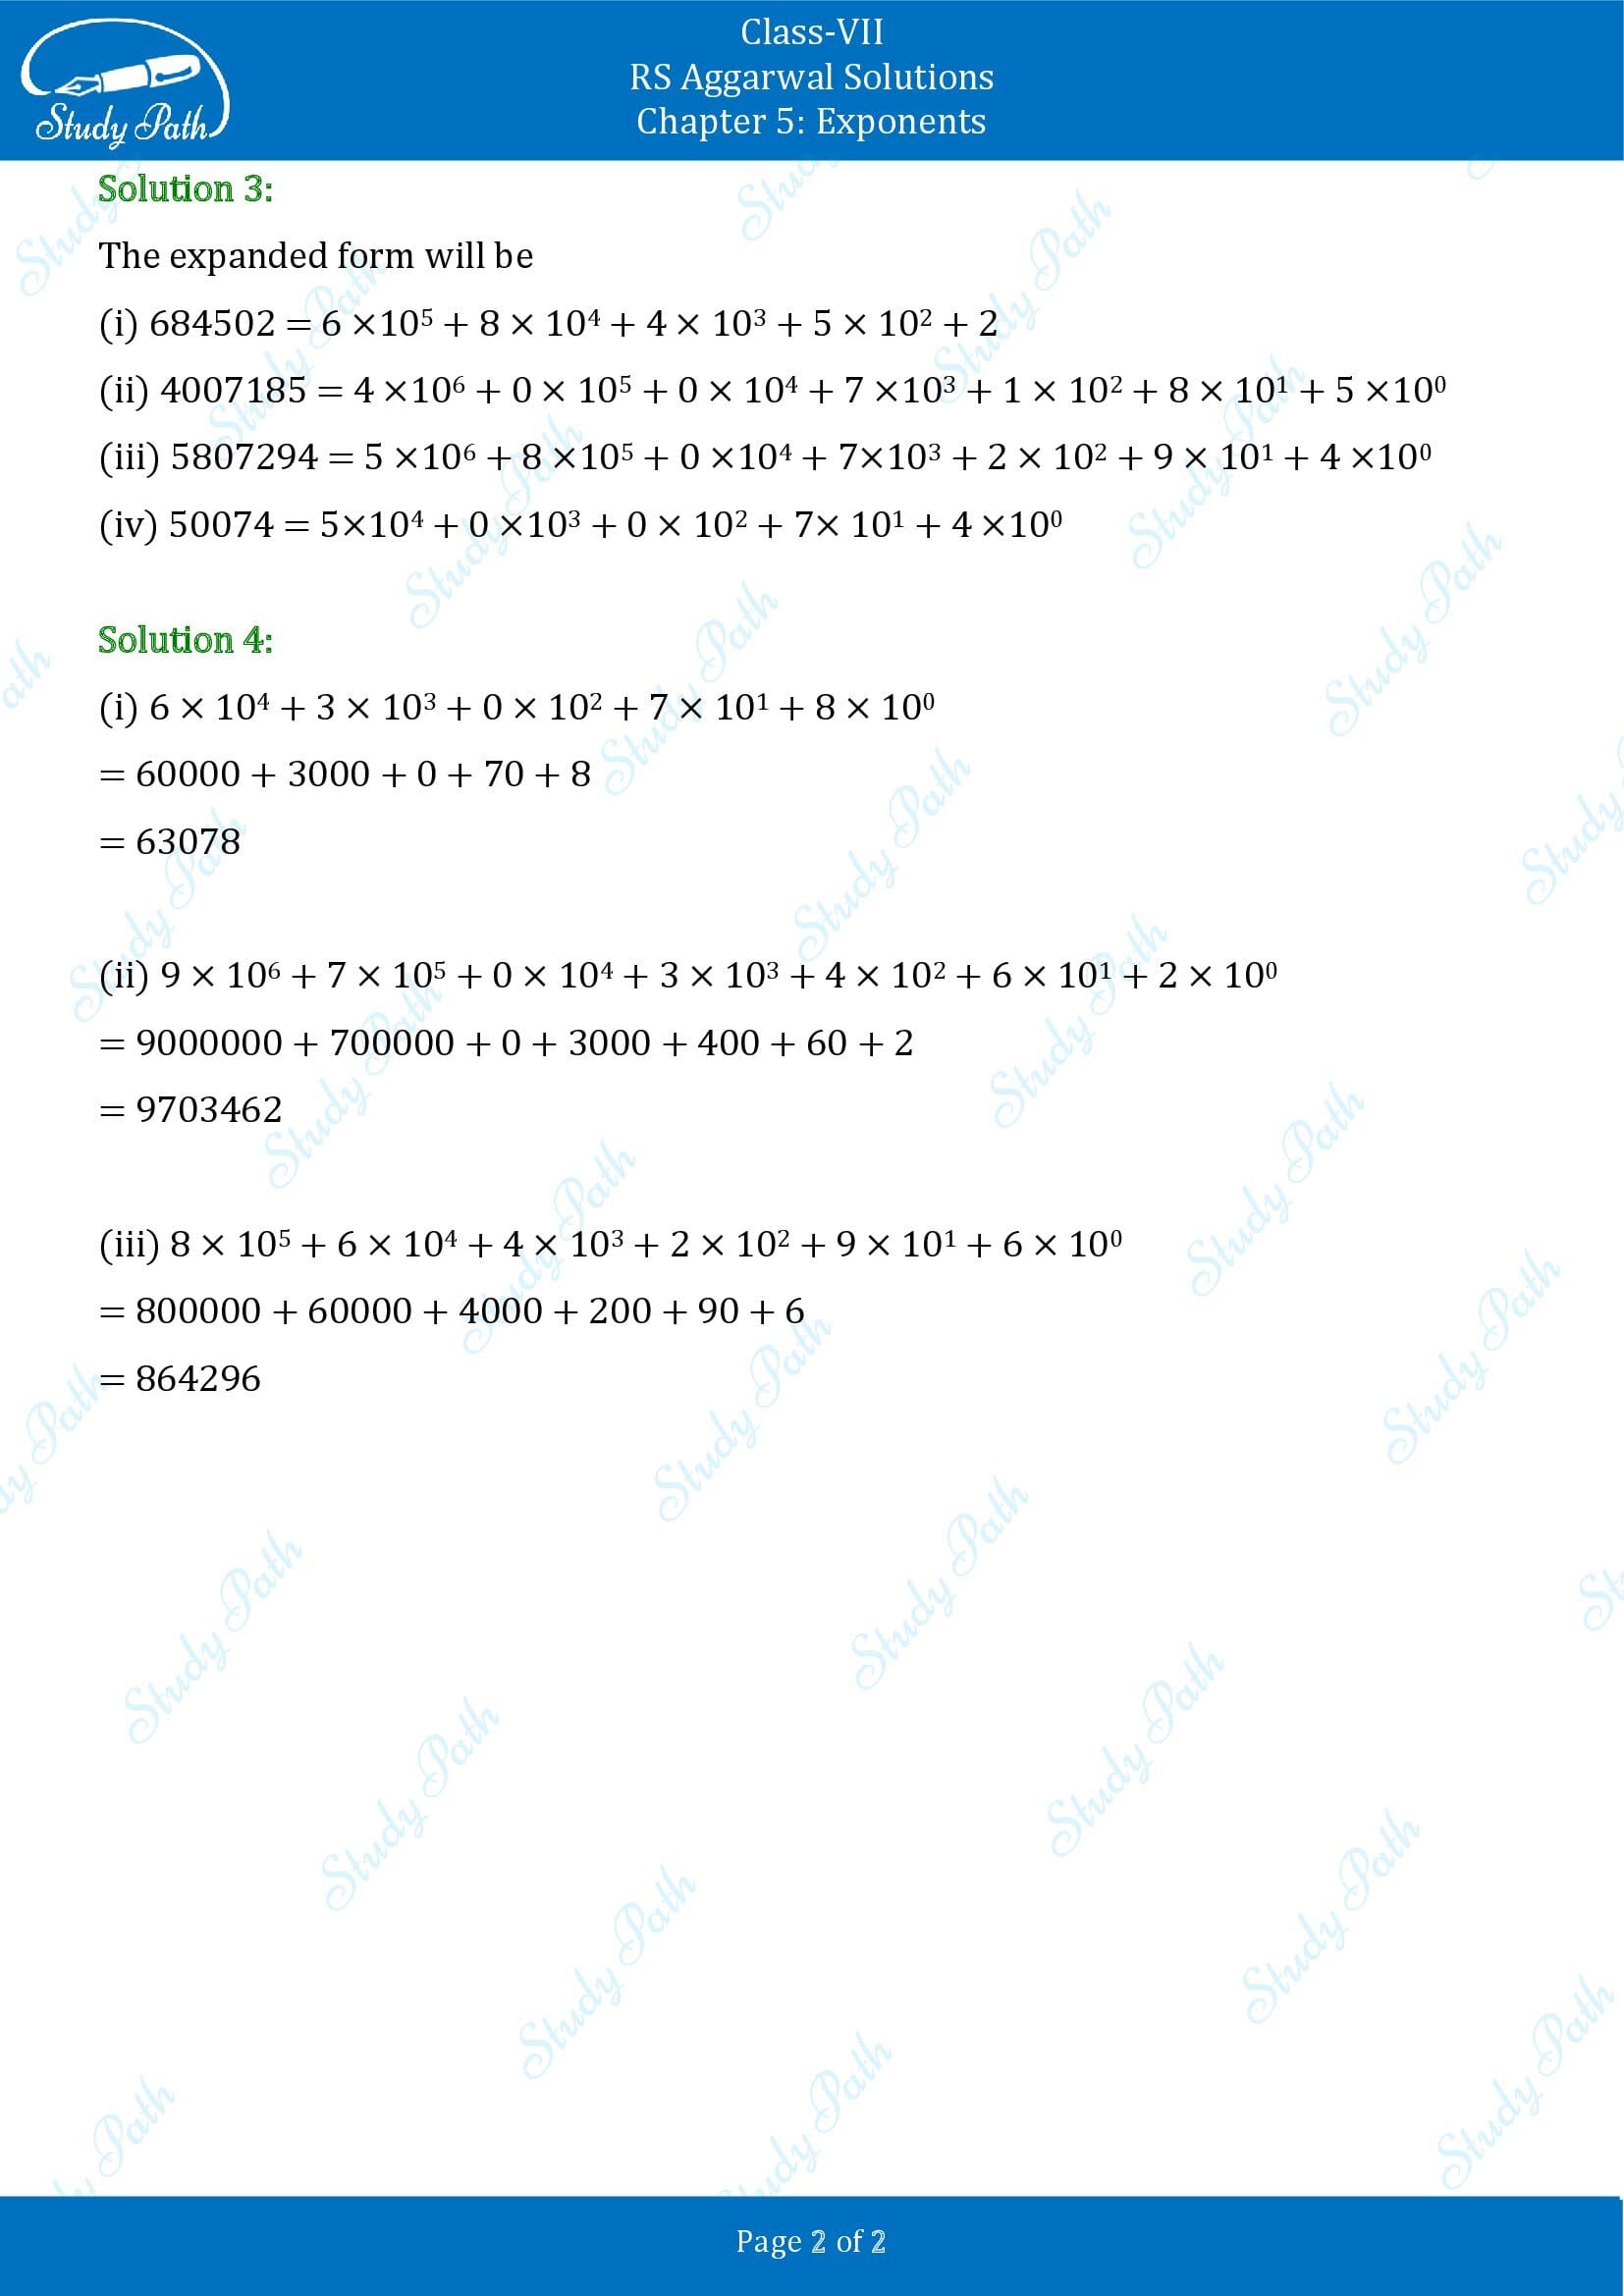 RS Aggarwal Solutions Class 7 Chapter 5 Exponents Exercise 5B 002